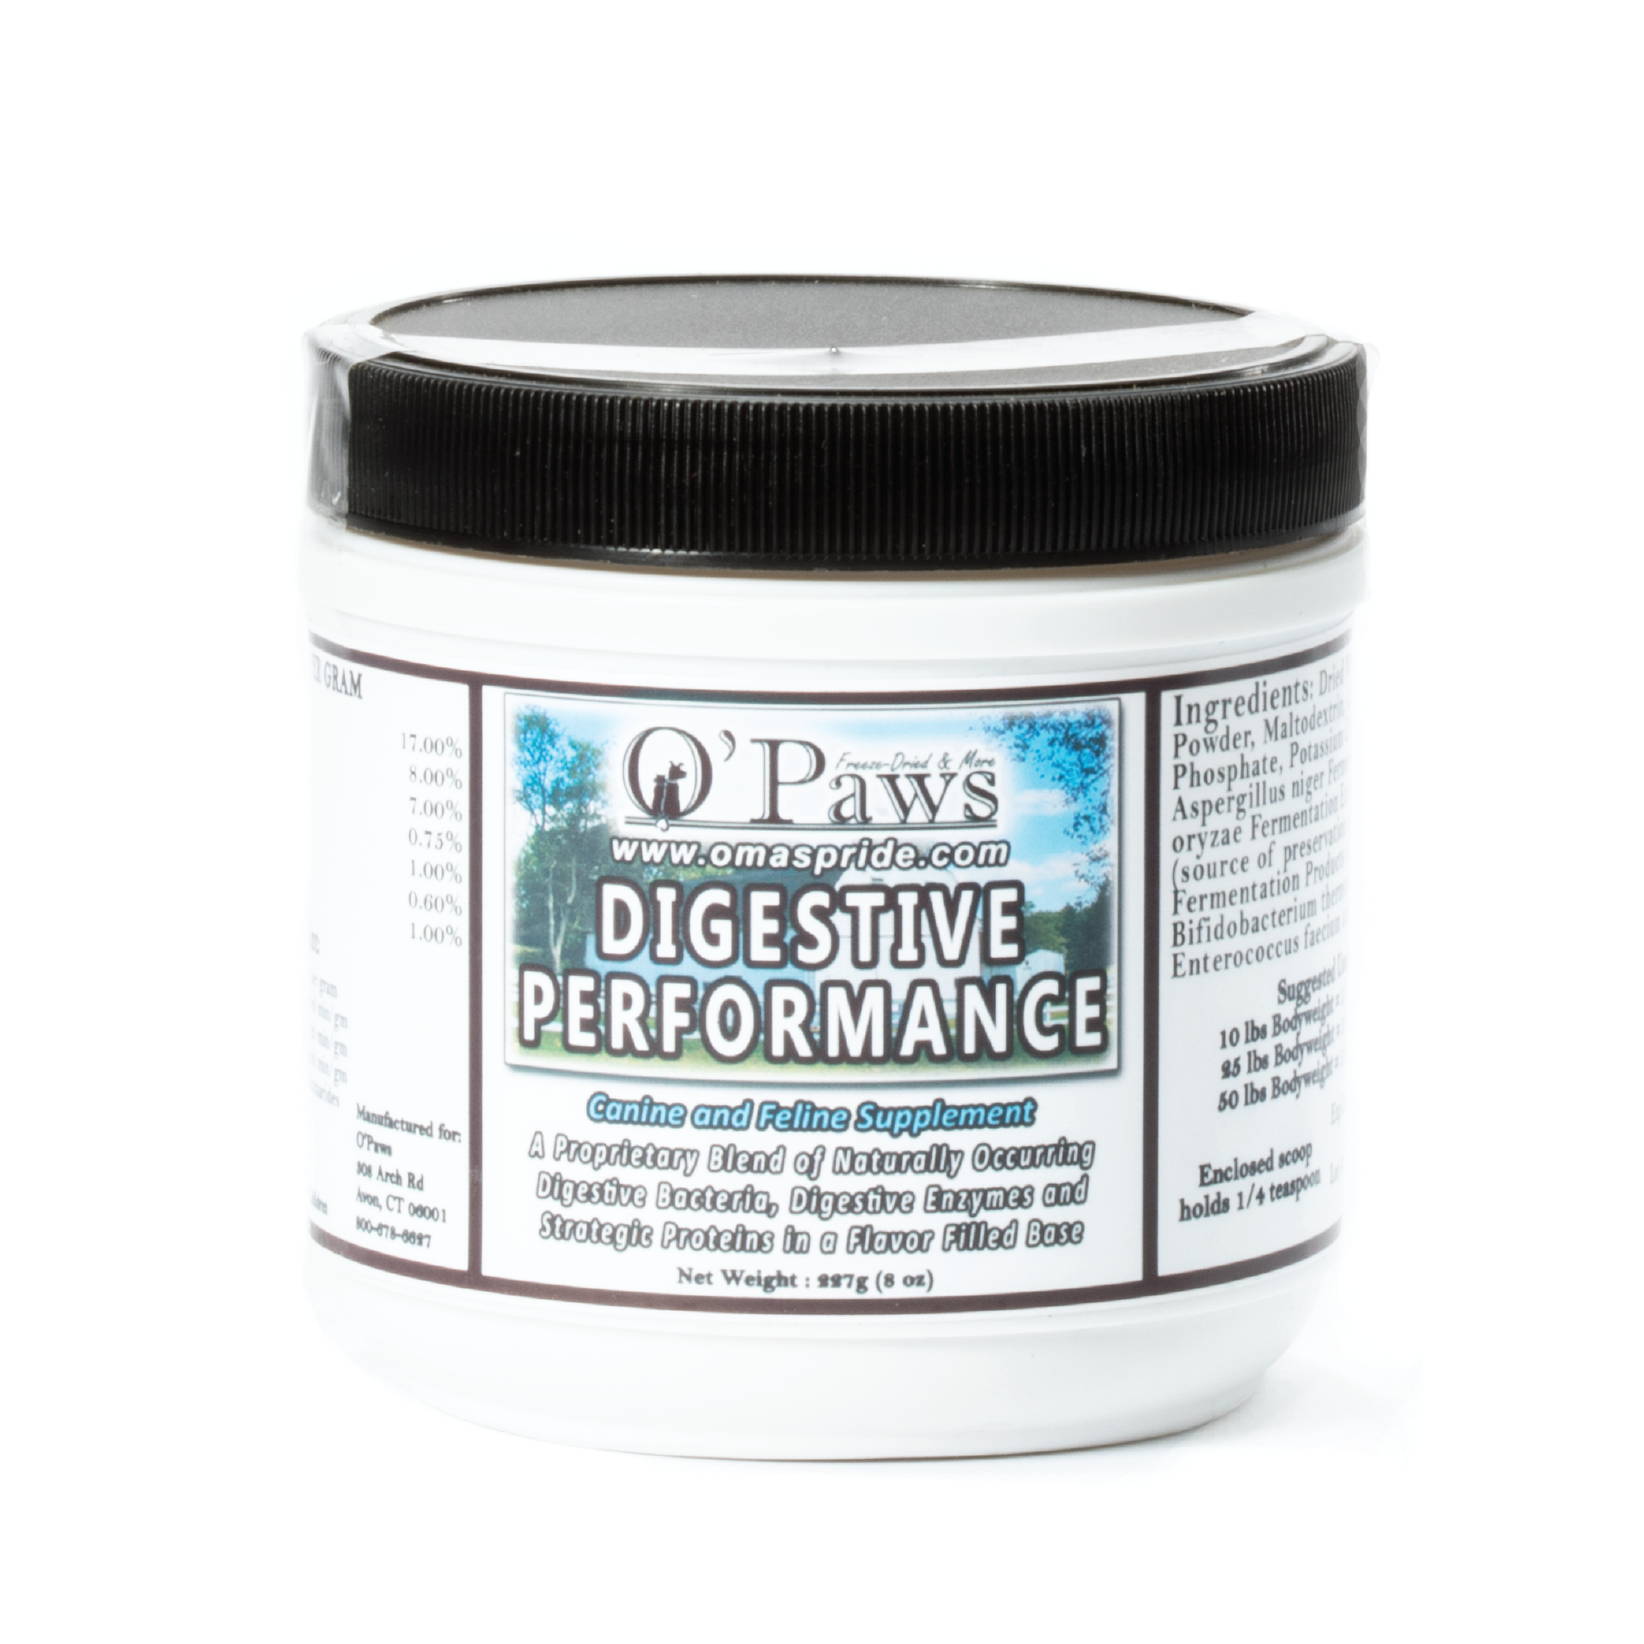 Oma's Pride digestive performance supplement jar on white background.